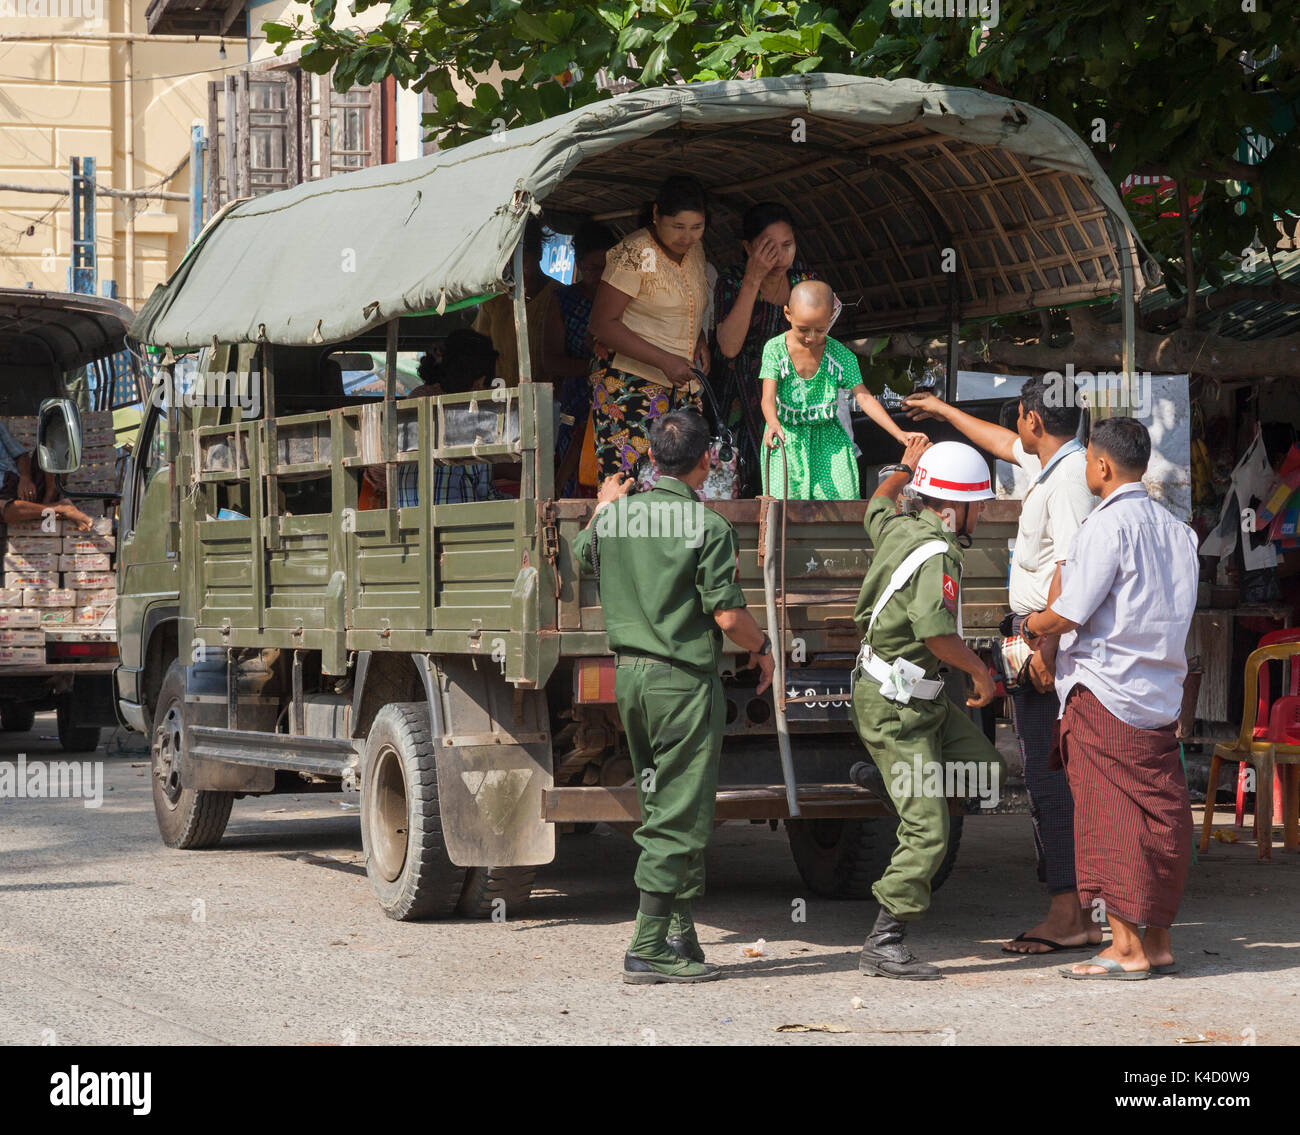 myanmar-military-policeman-disembarks-from-army-truck-with-civilians-K4D0W9.jpg